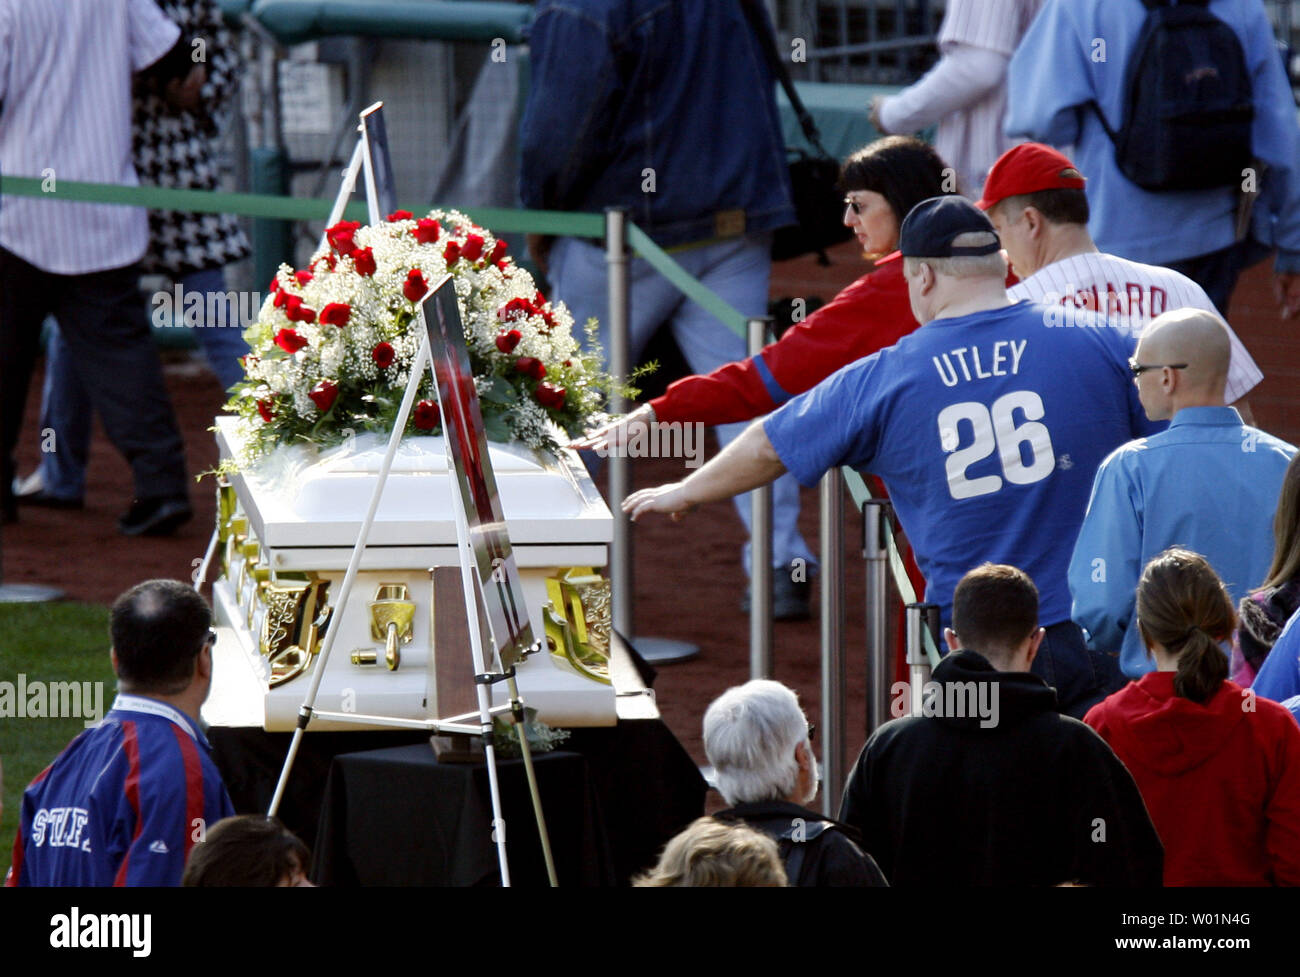 Some of the thousands of fans who came to Citizens Bank Park April 18, 2009 to pay their respects to longtime Hall of Fame Philadelphia Phillies announcer Harry Kalas reach over to touch the casket as it sits at home plate.  Kalas,  a Philadelphia Phillies announcer for the past 30 years, died earlier this week at a game.  He is only the second baseball person to lie in state in a professional baseball stadium since Babe Ruth in 1948.   (UPI Photo/John Anderson) Stock Photo